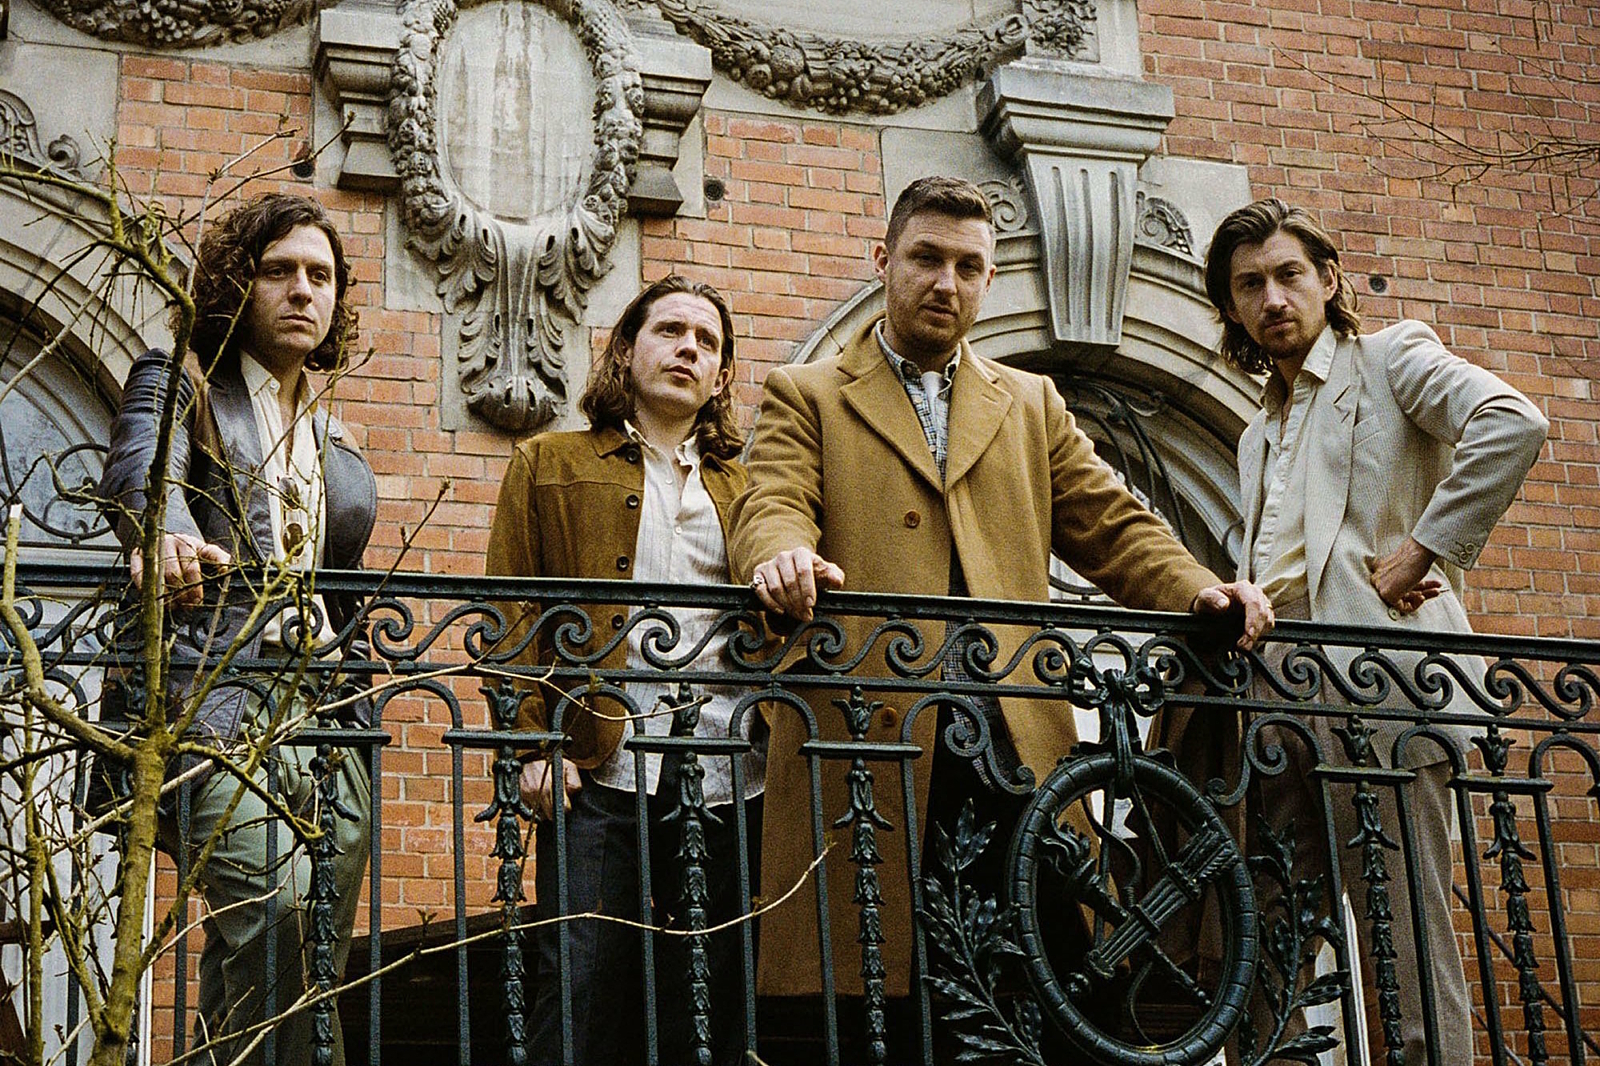 Arctic Monkeys' new album is "pretty much" finished and set to be released in 2022